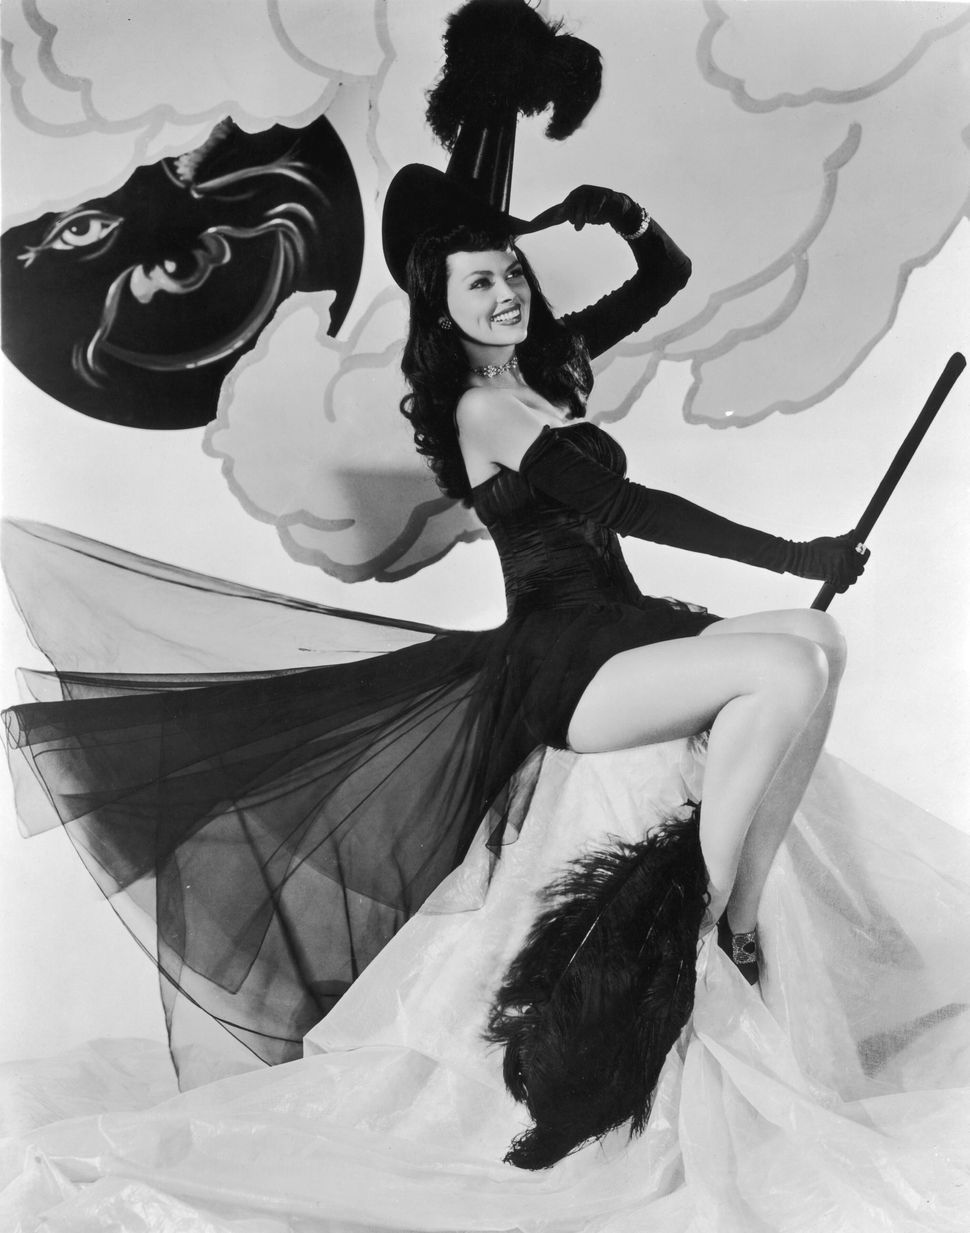 Actress Dusty Anderson poses in a witch's hat and a strapless chiffon costume while holding a feathered broom for Columbia Pictures in the 1940s.